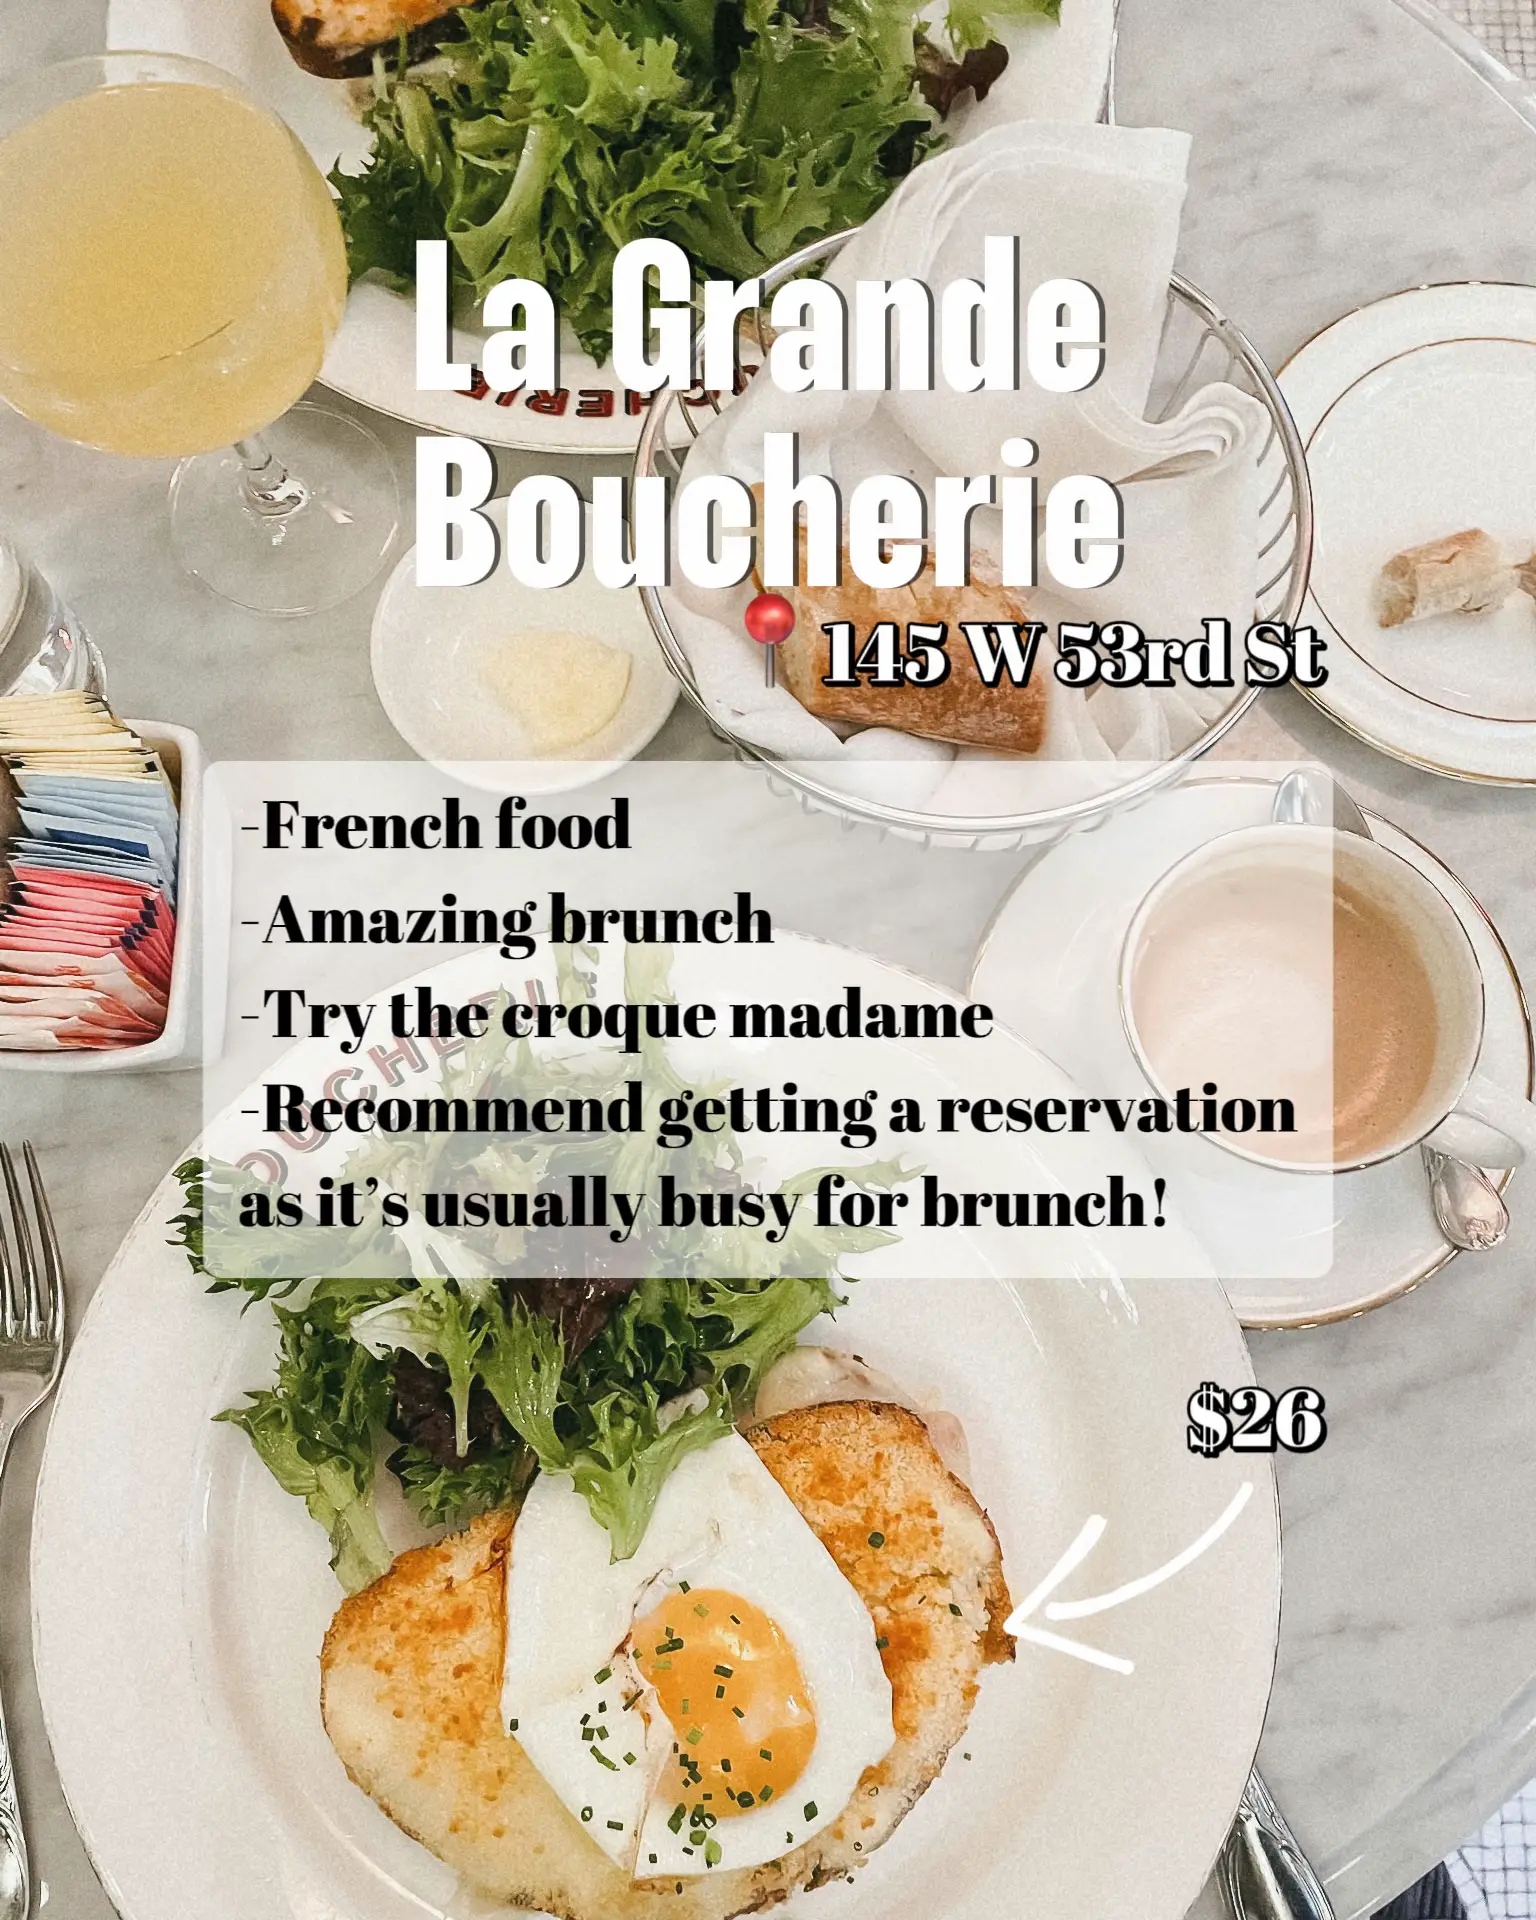  A collage of plates of food with the words "La Grande Boucherie"